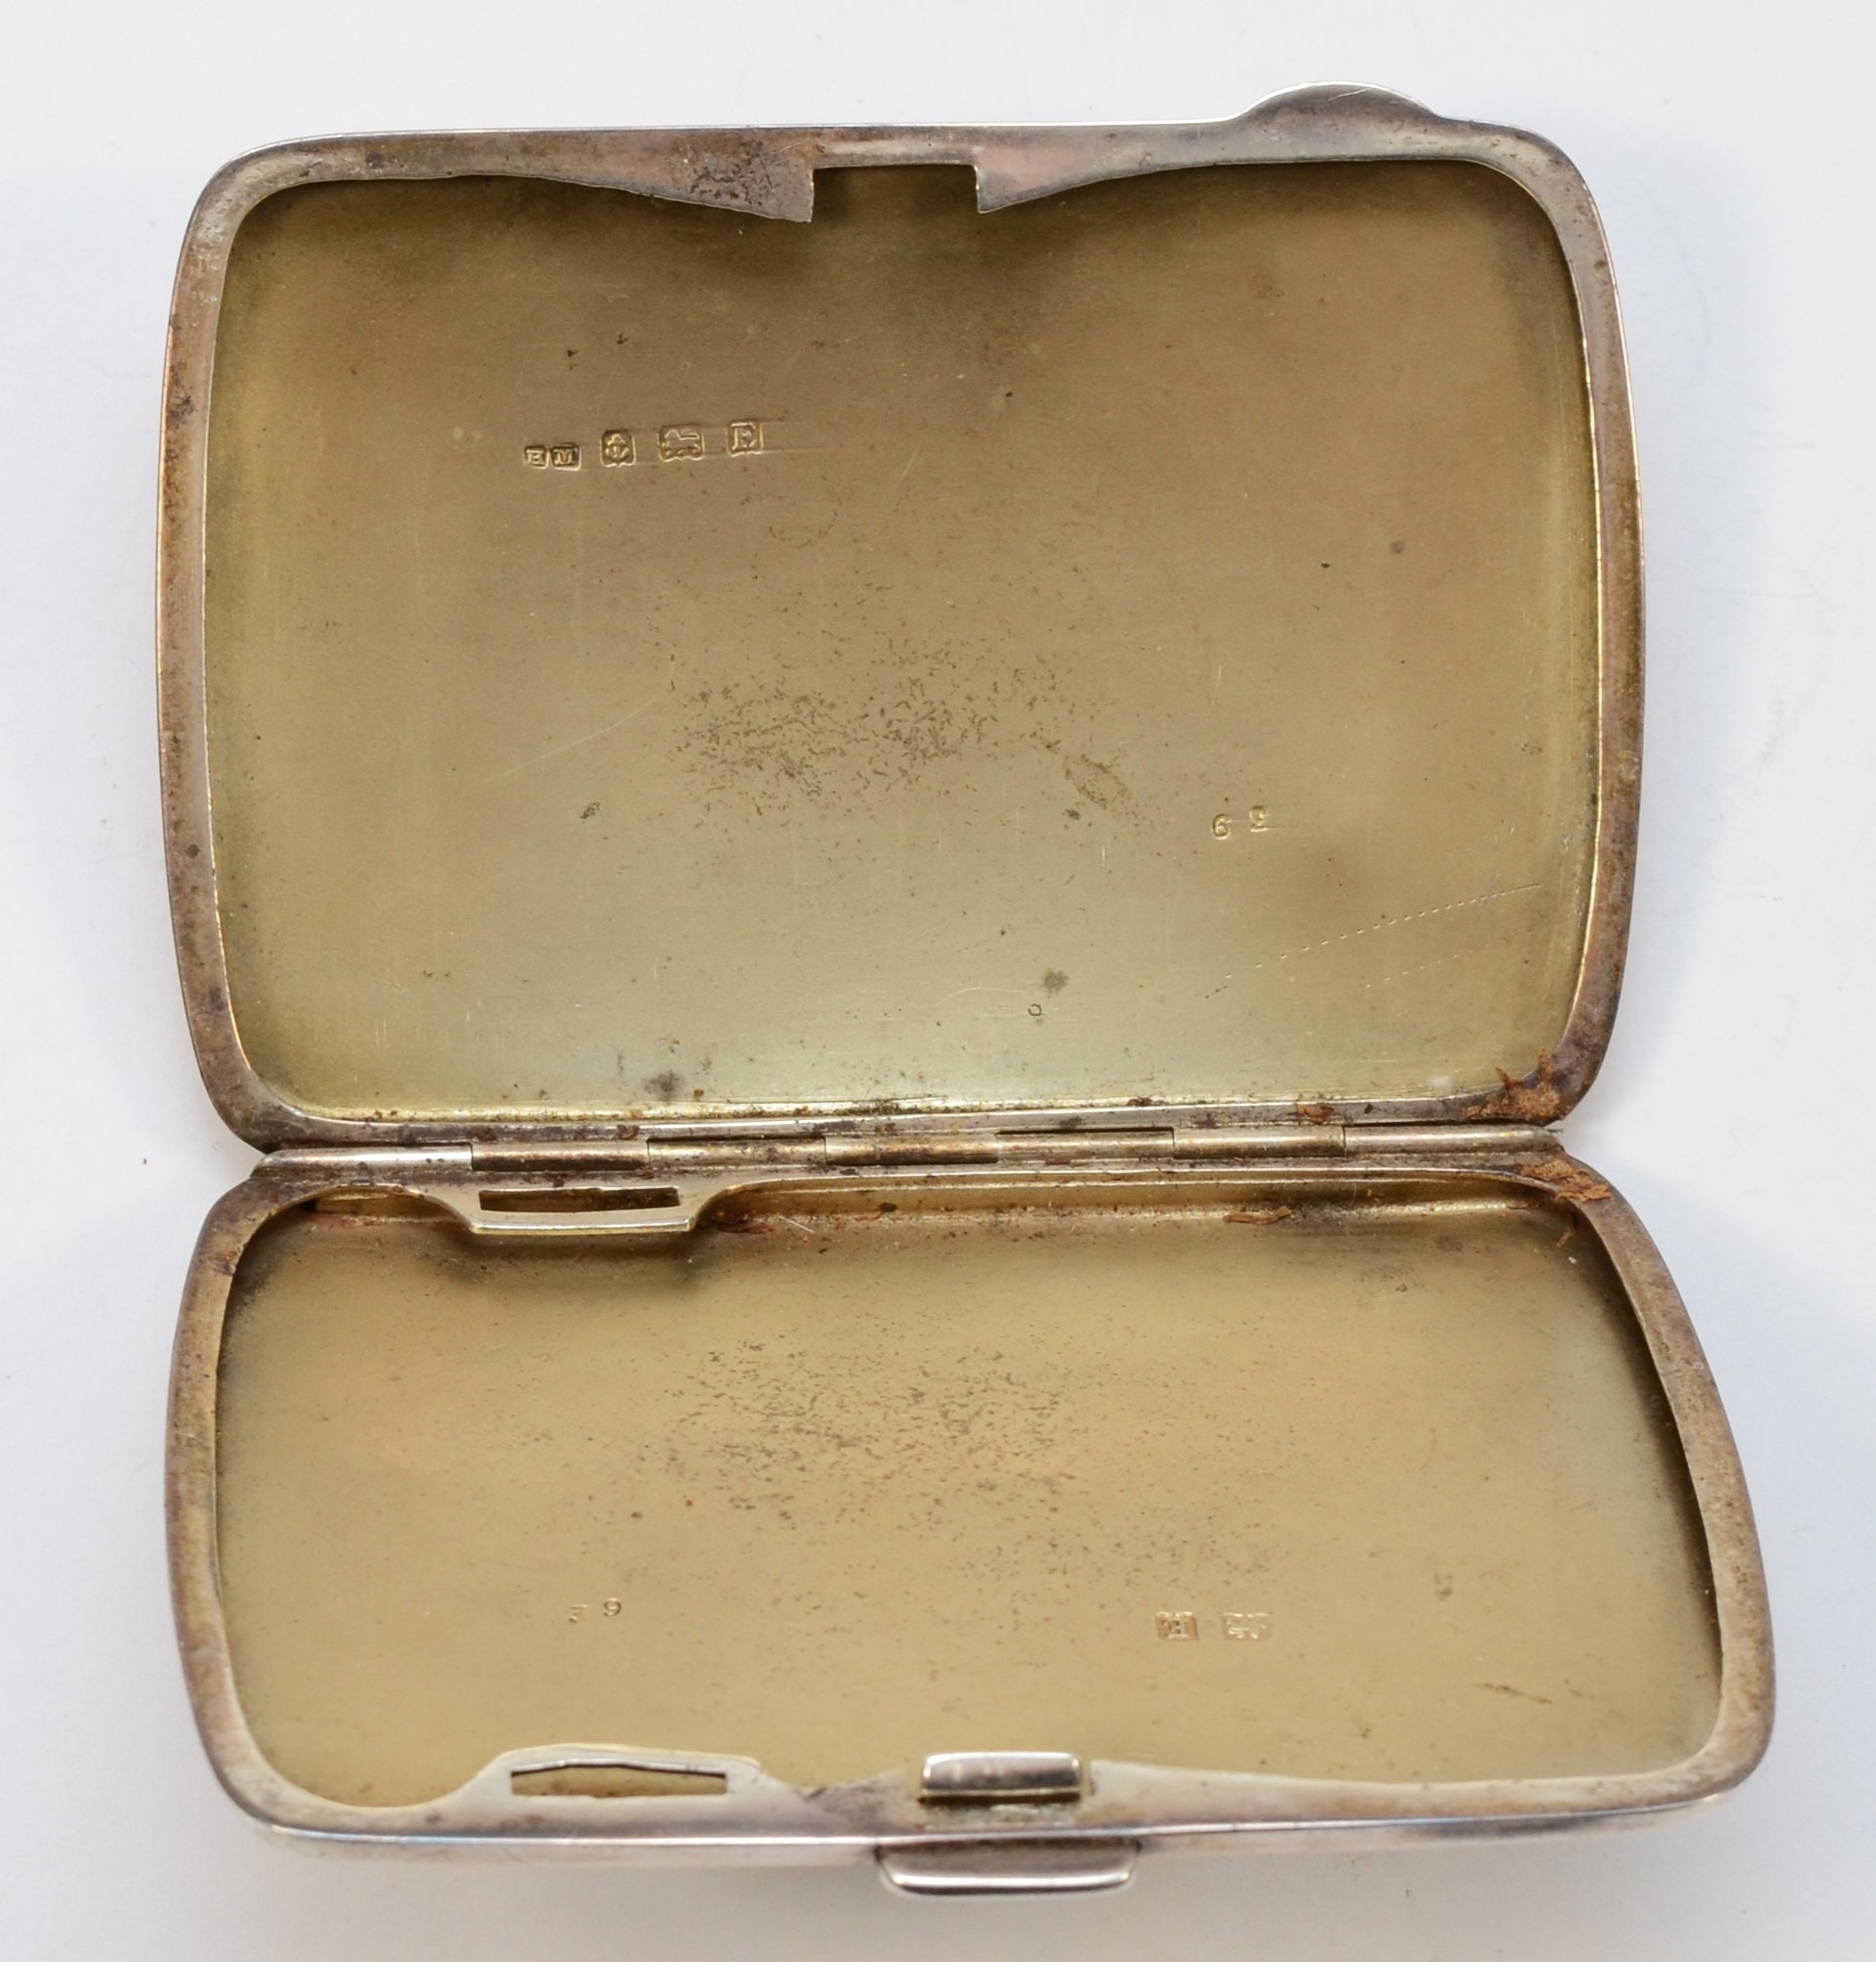 A George V silver and guilloche enameled cigarette case, by Henry Matthews, Birmingham 1929, - Image 3 of 3